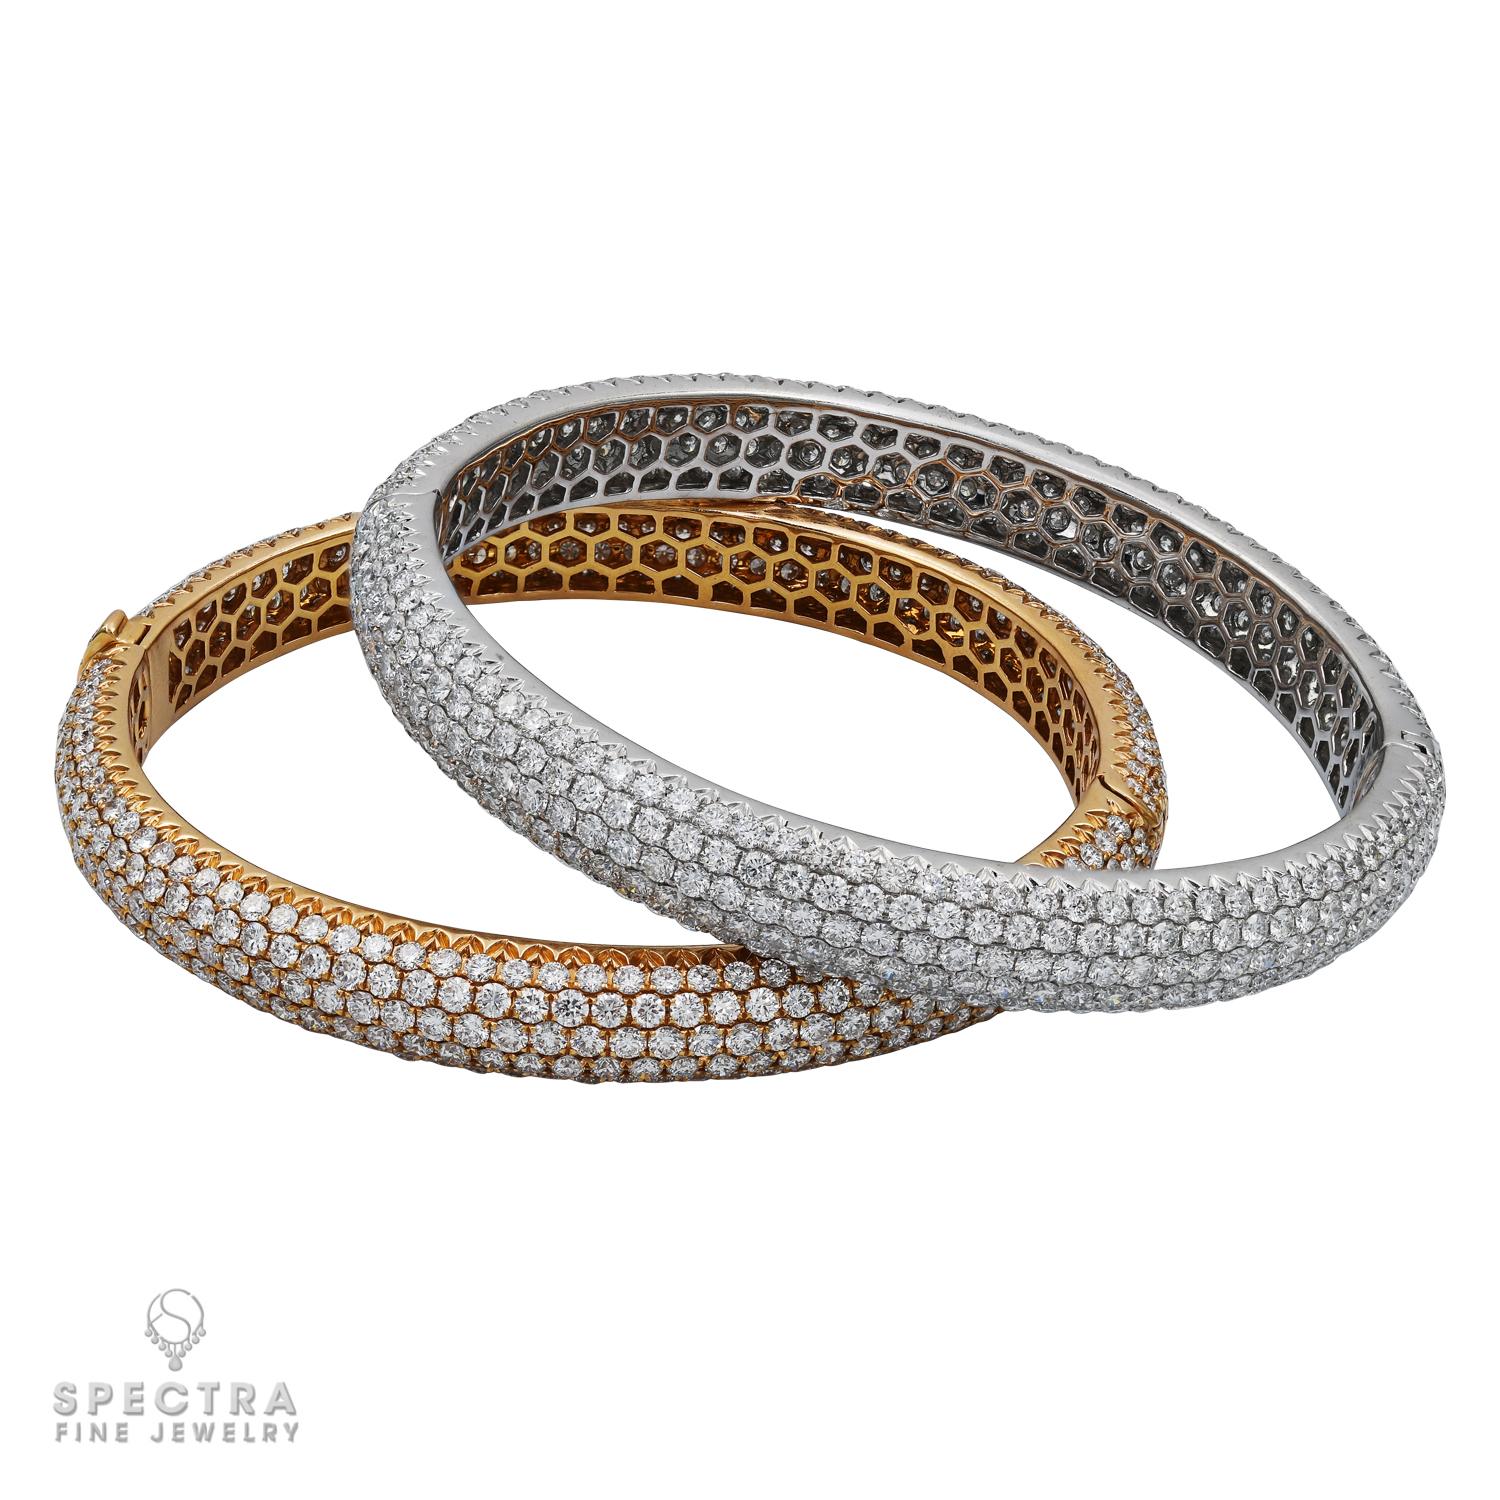 A set of two pavé-set circular-cut diamond bangles, 2 1/4 ins. diameter, mounted in 18k white and rose gold.
Diamonds in a rose gold bangle weigh a total of 12.77 carats.
Diamonds in a white gold bangle weigh a total of 13.21 carats.
Diamonds are